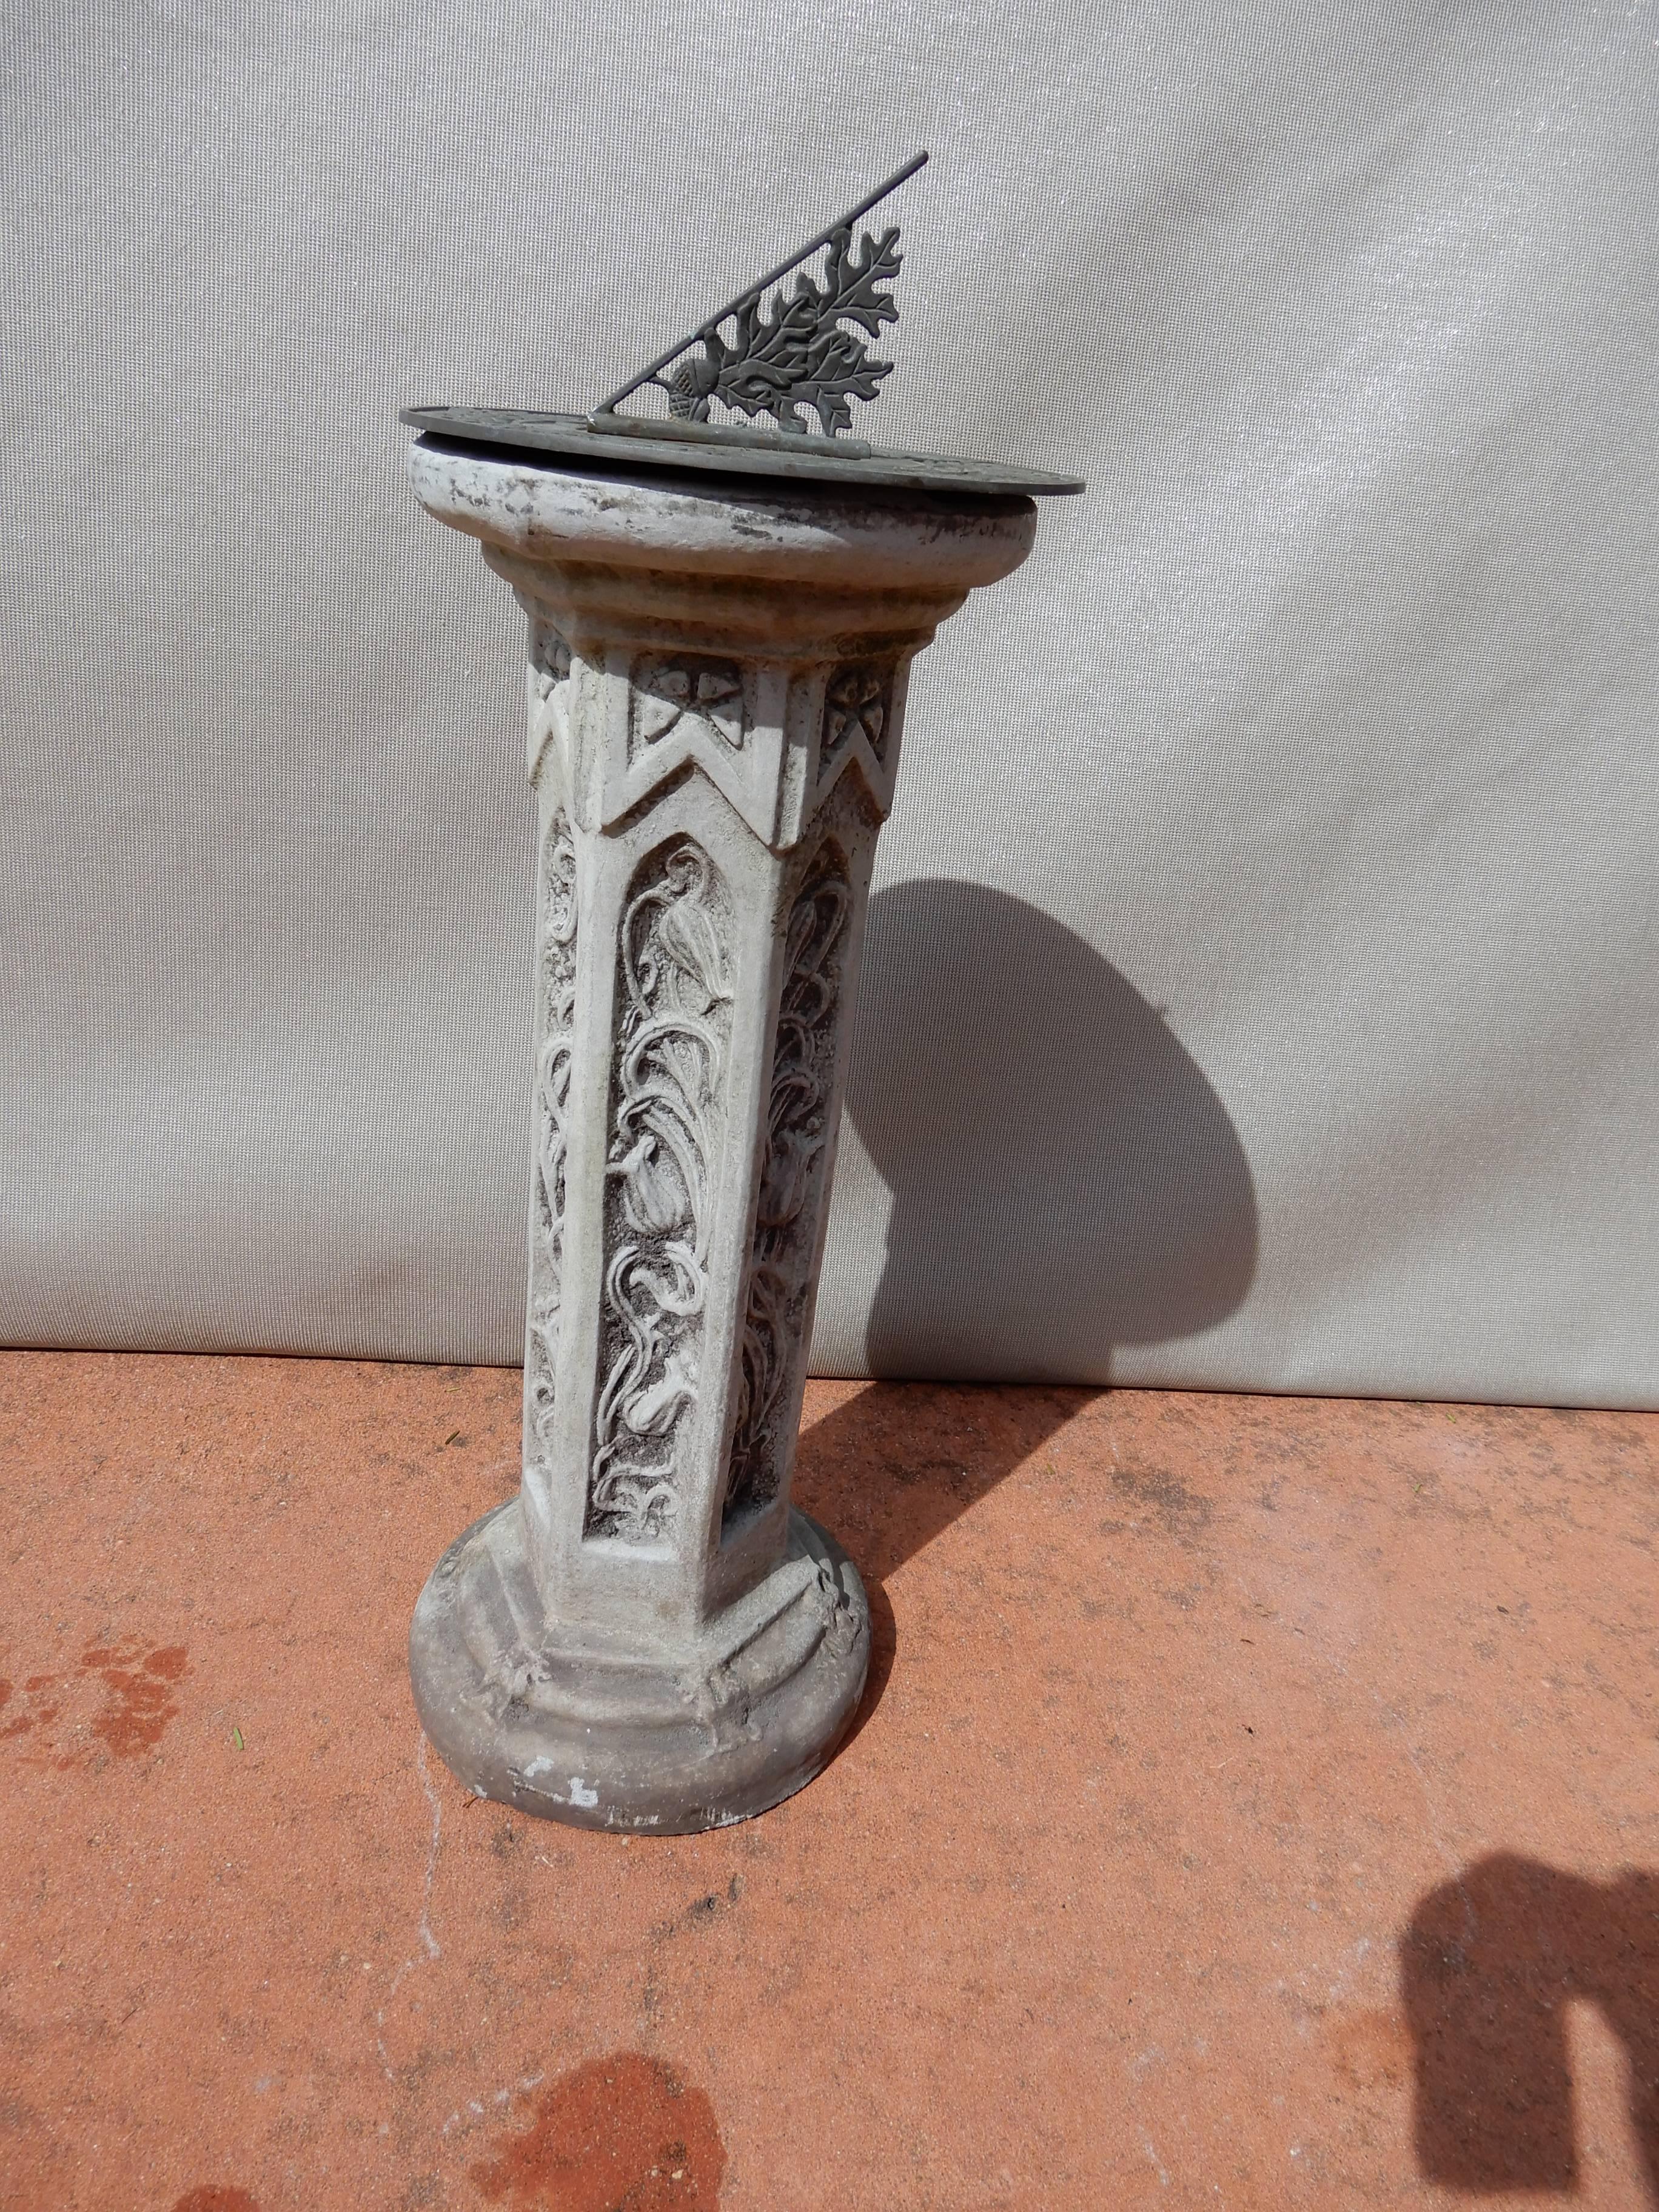 A cast stone sun dial. This sundial has the most ornate detailed ornate cast stone column.
The metal sundial with a nice patina.